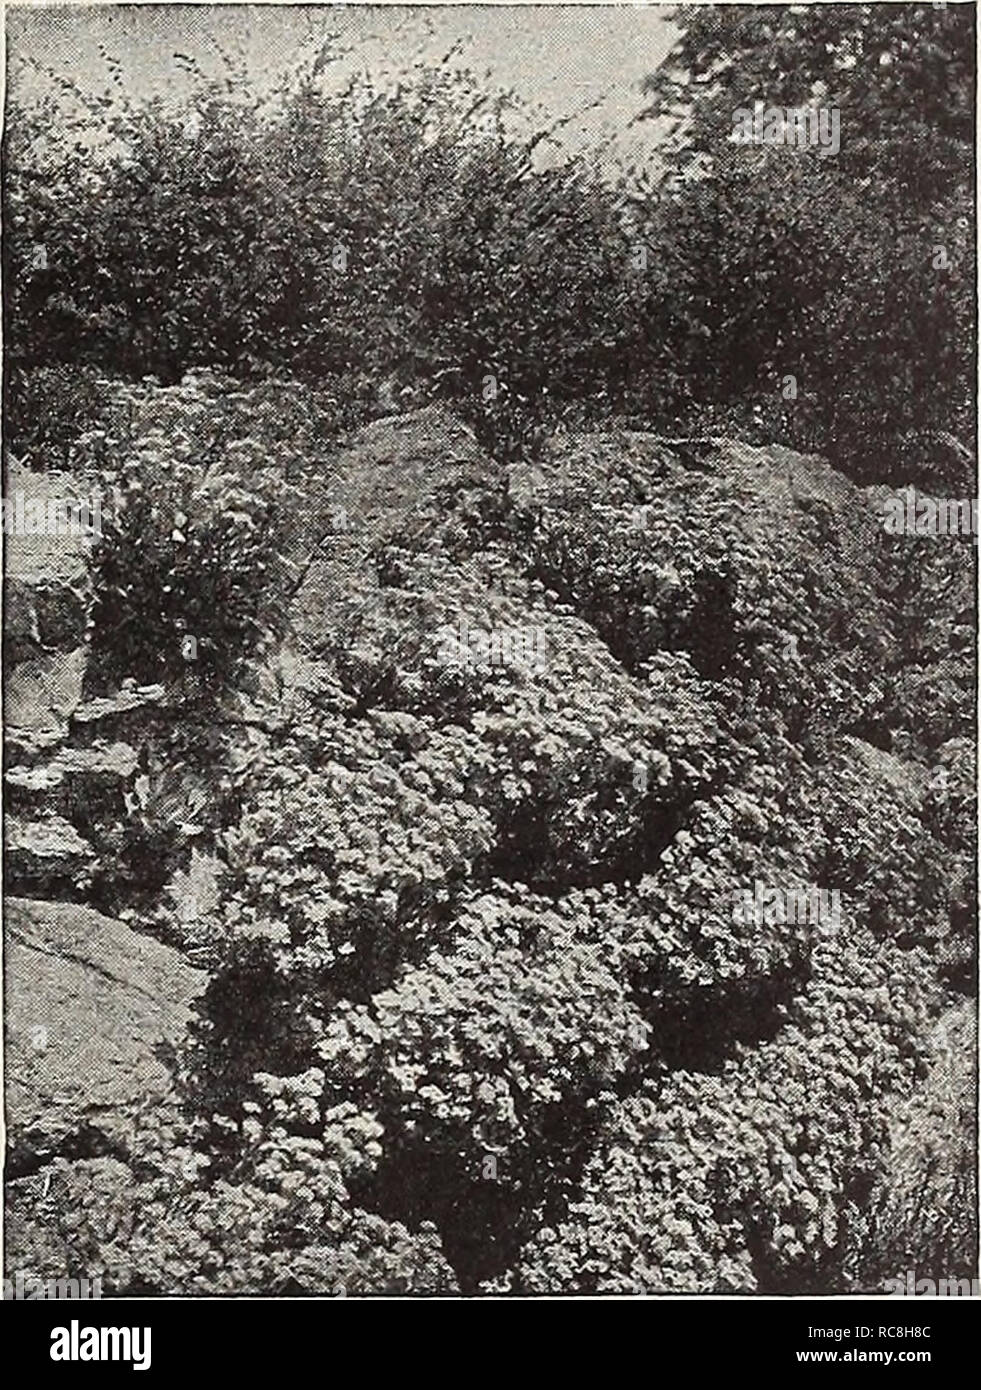 . Dreer's garden book 1932. Seeds Catalogs; Nursery stock Catalogs; Gardening Equipment and supplies Catalogs; Flowers Seeds Catalogs; Vegetables Seeds Catalogs; Fruit Seeds Catalogs. Alyssum Saxatile Compactum, on Rockery ACONITUM Aethionema (Lebanon Candytuft) Iberideum. A free flowering trailer for the rock garden with gray glaucous leaves and white flowers in April and May. Persicum. Beautiful shrubby alpines of spreading habit. Deep rose color, flowering from May to August, well adapted for the rockery or the border. 12 to 15 inches. 35 cts. each; $3.50 per doz. AgrOStemma (Rose Campion)  Stock Photo